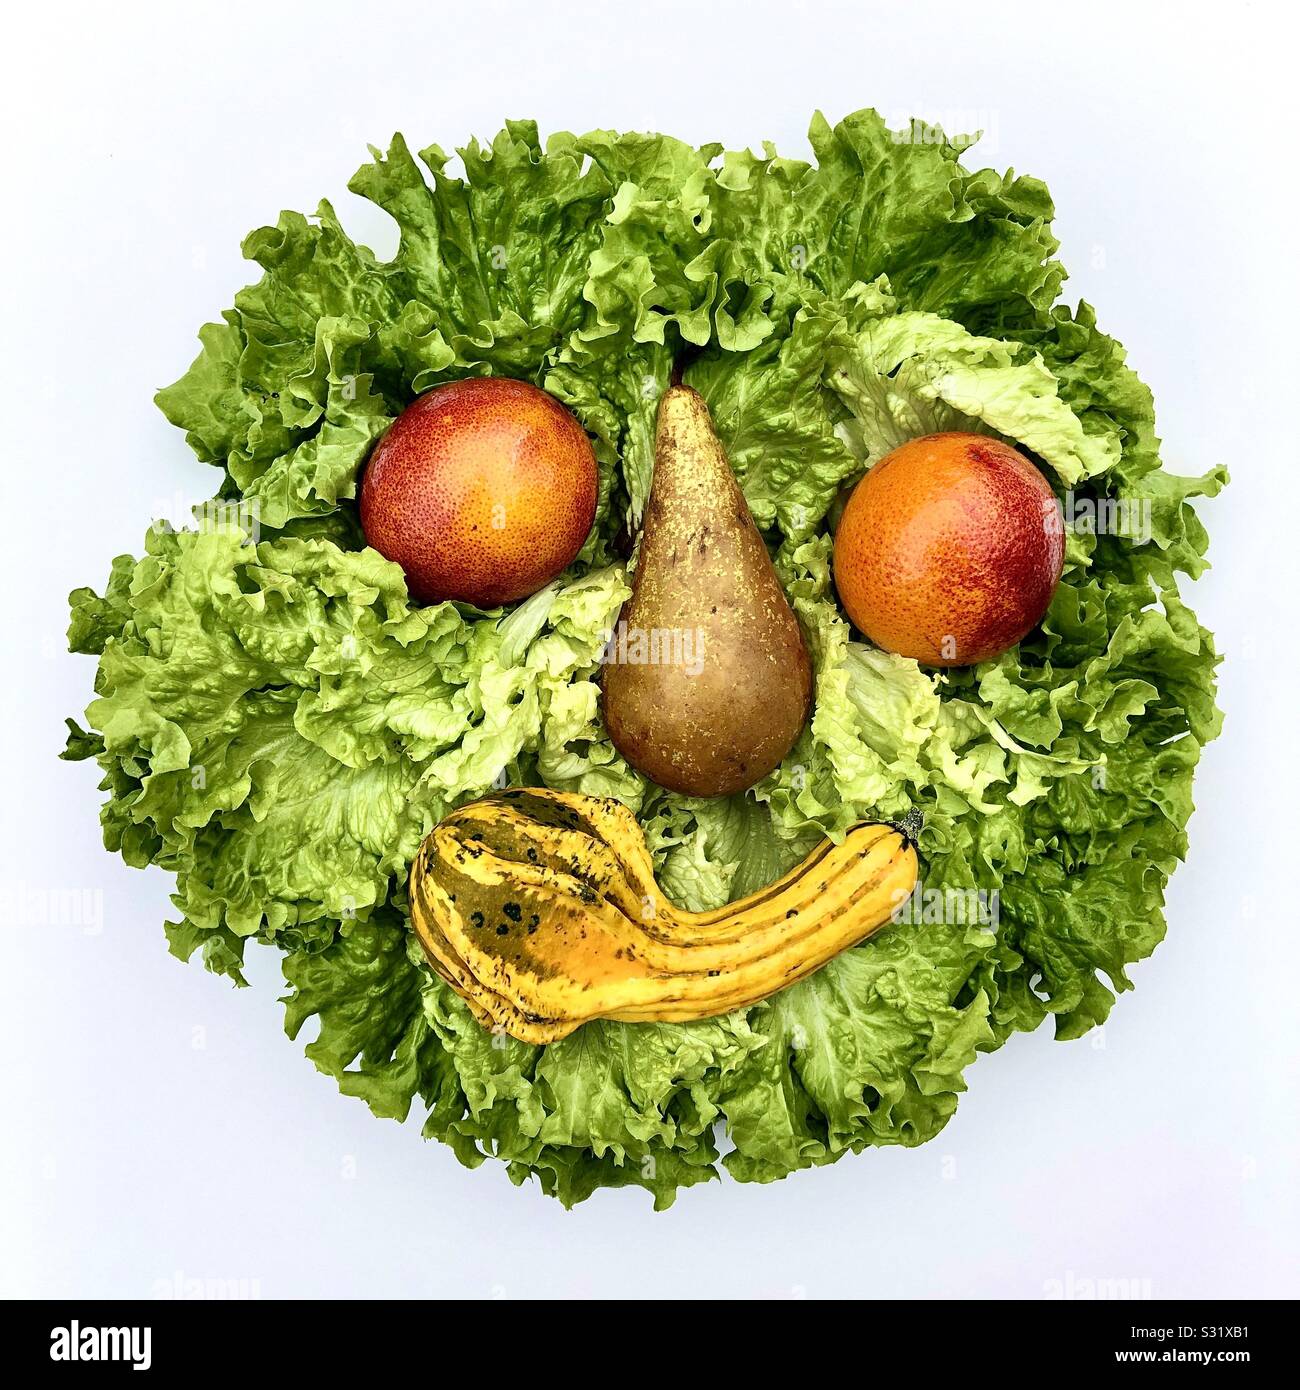 Happy « smiley » face made with fruits and vegetables. Stock Photo